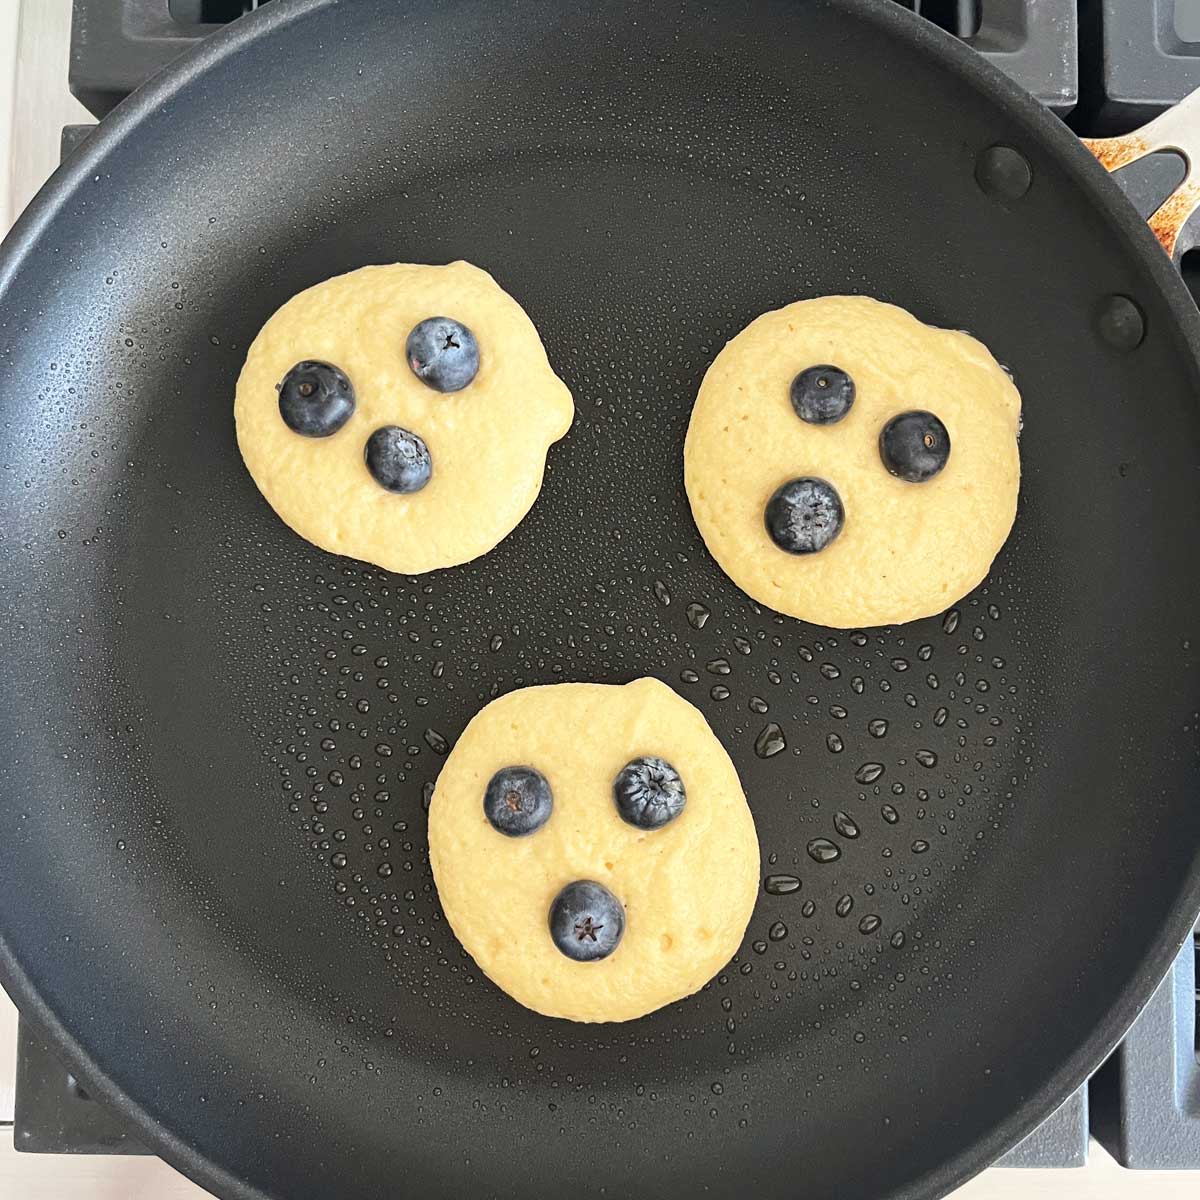 Three pancakes in a skillet, topped with blueberries.